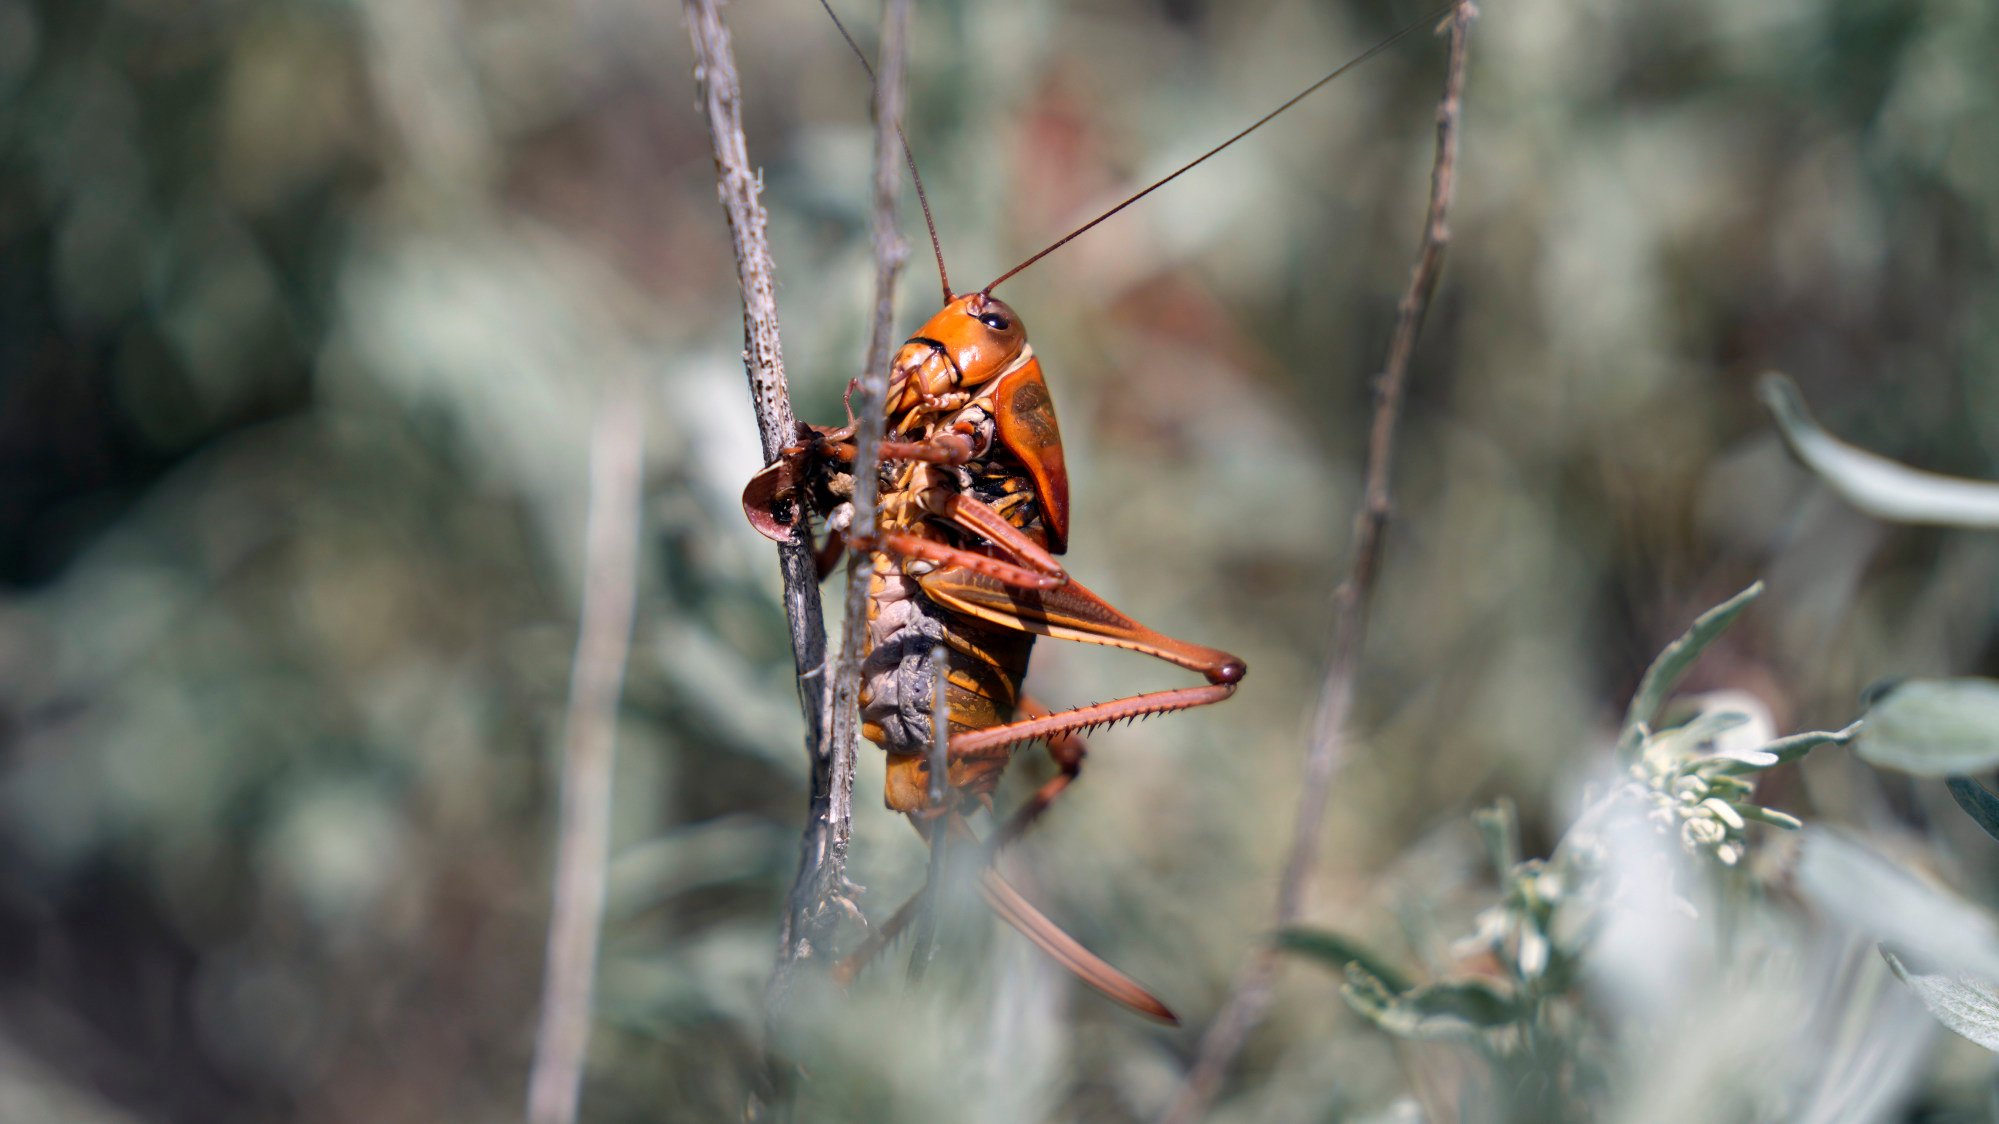 Bloodred Mormon crickets invade US town, as residents fight back